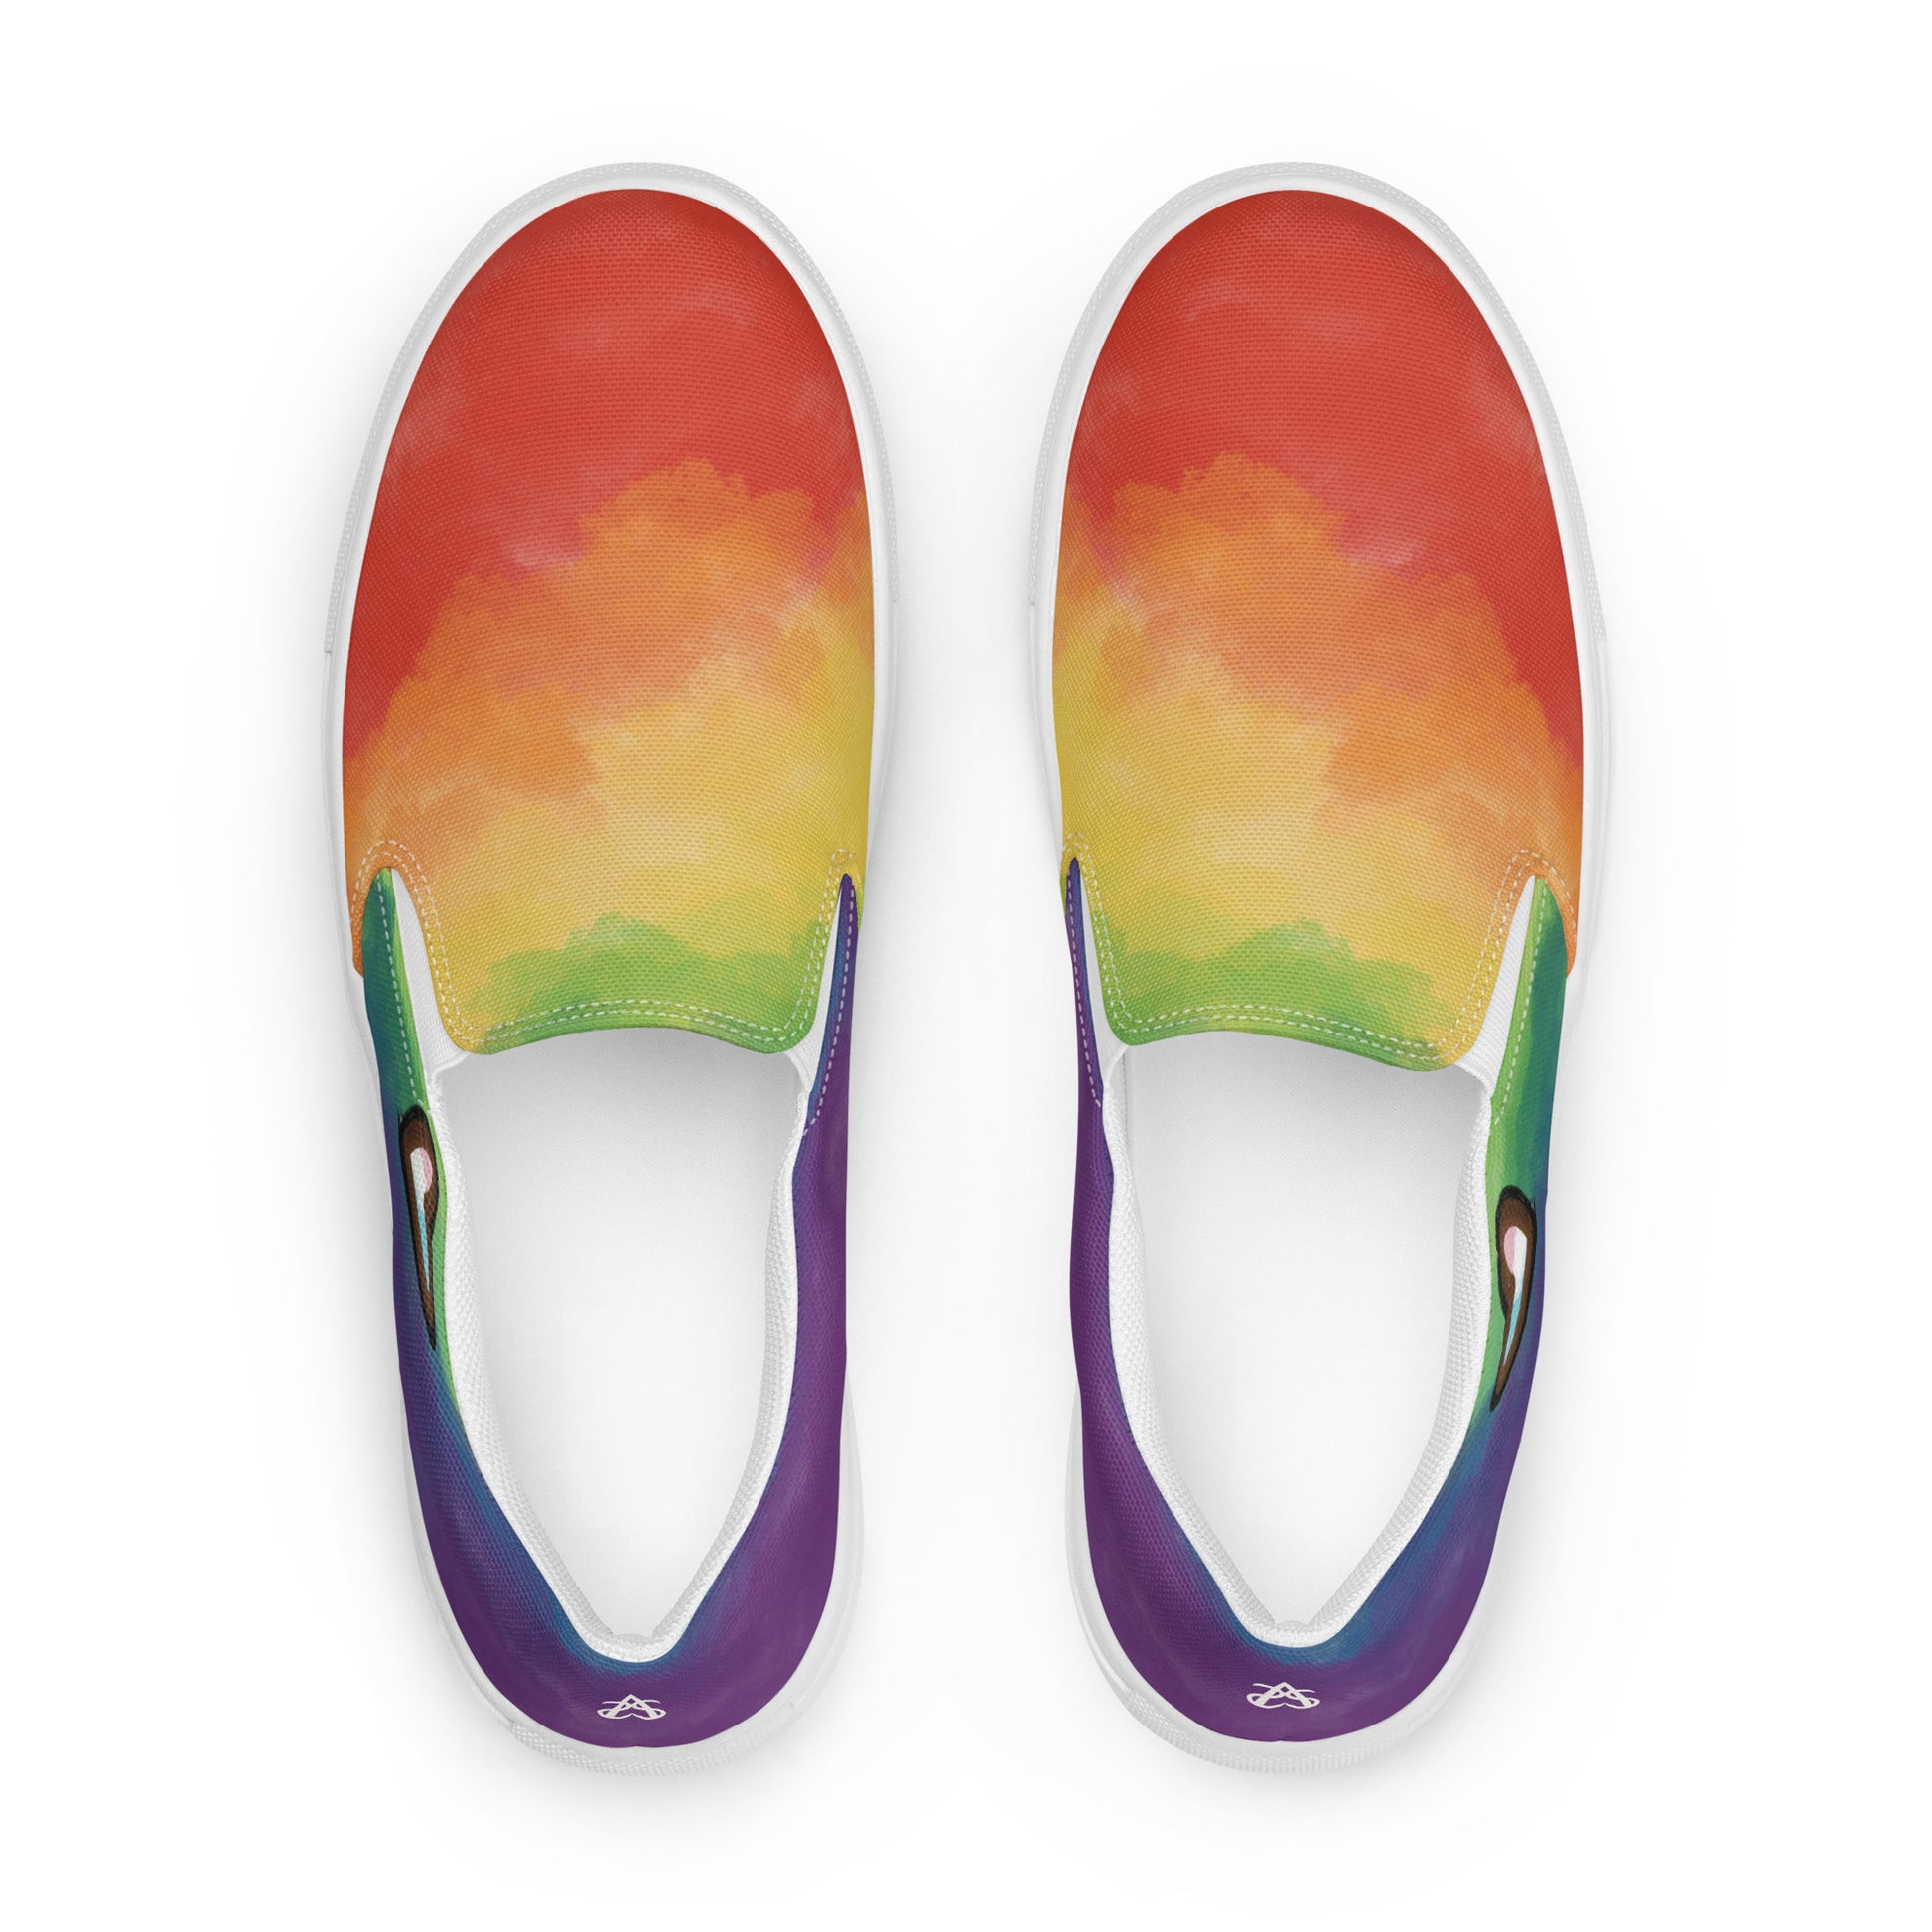 Top view: A pair of slip on shoes with rainbow clouds wrapping around the shoe, a double heart in black and brown with the trans pride flag inside, and the Aras Sivad Studio logo on the back of the heel.